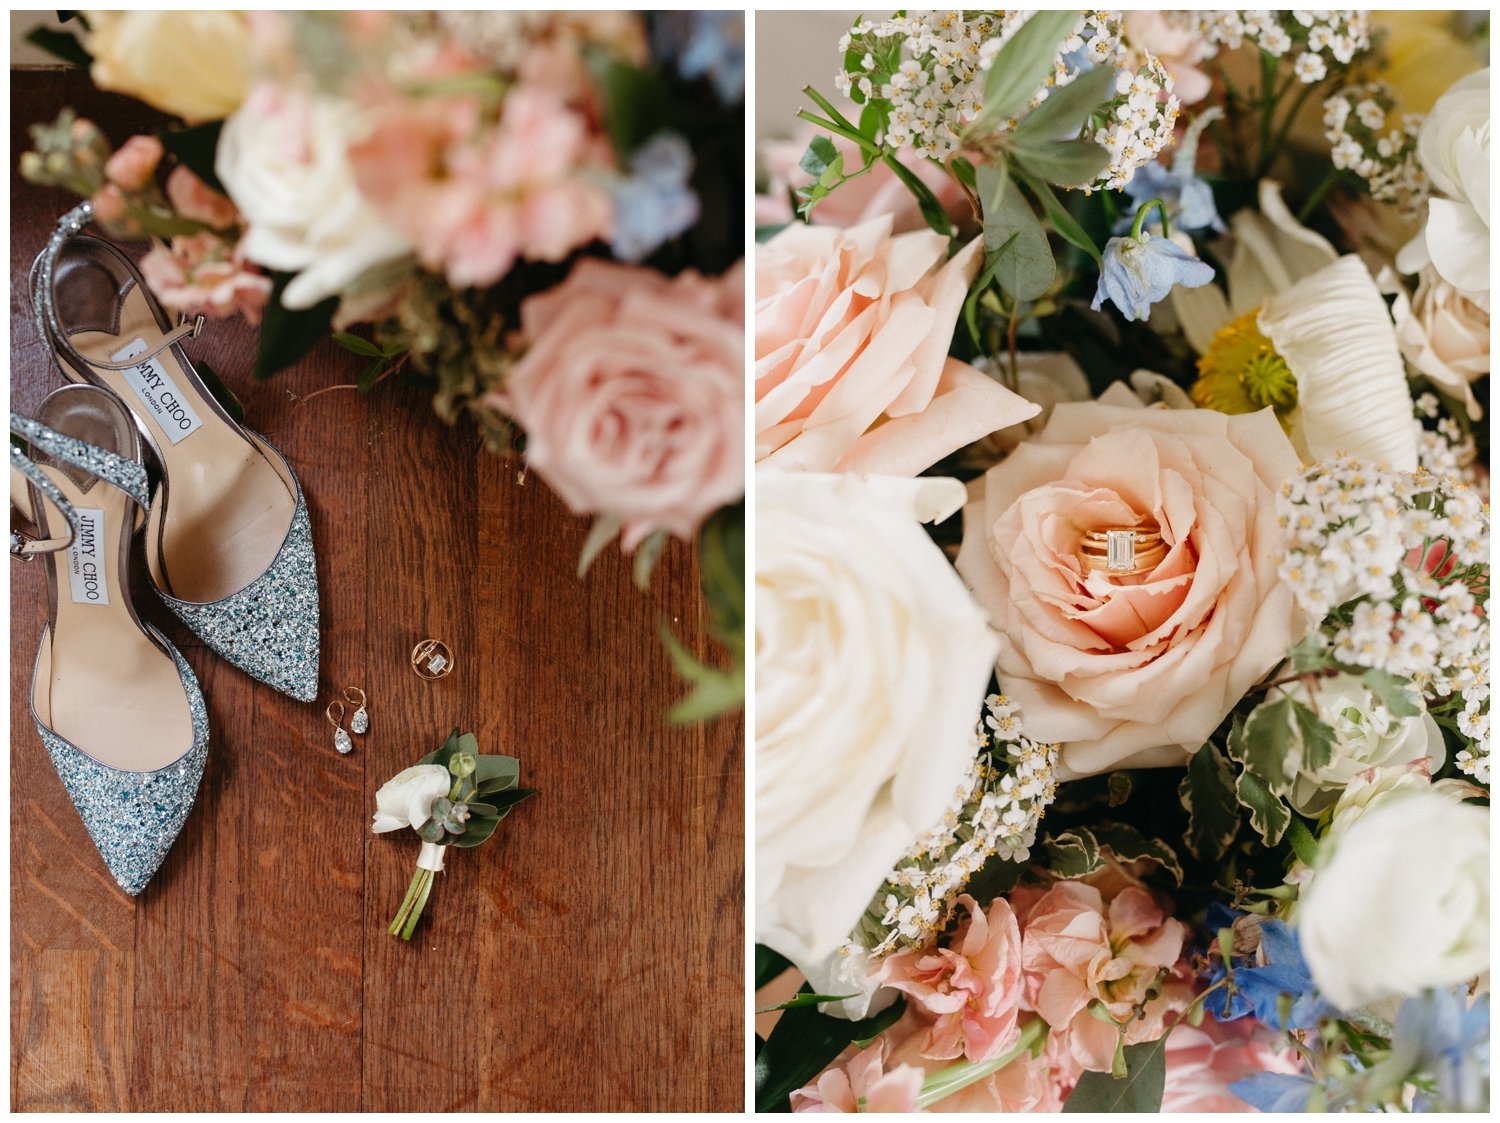 Detail photos of rings and bride's shoes with flowers before a small wedding reception